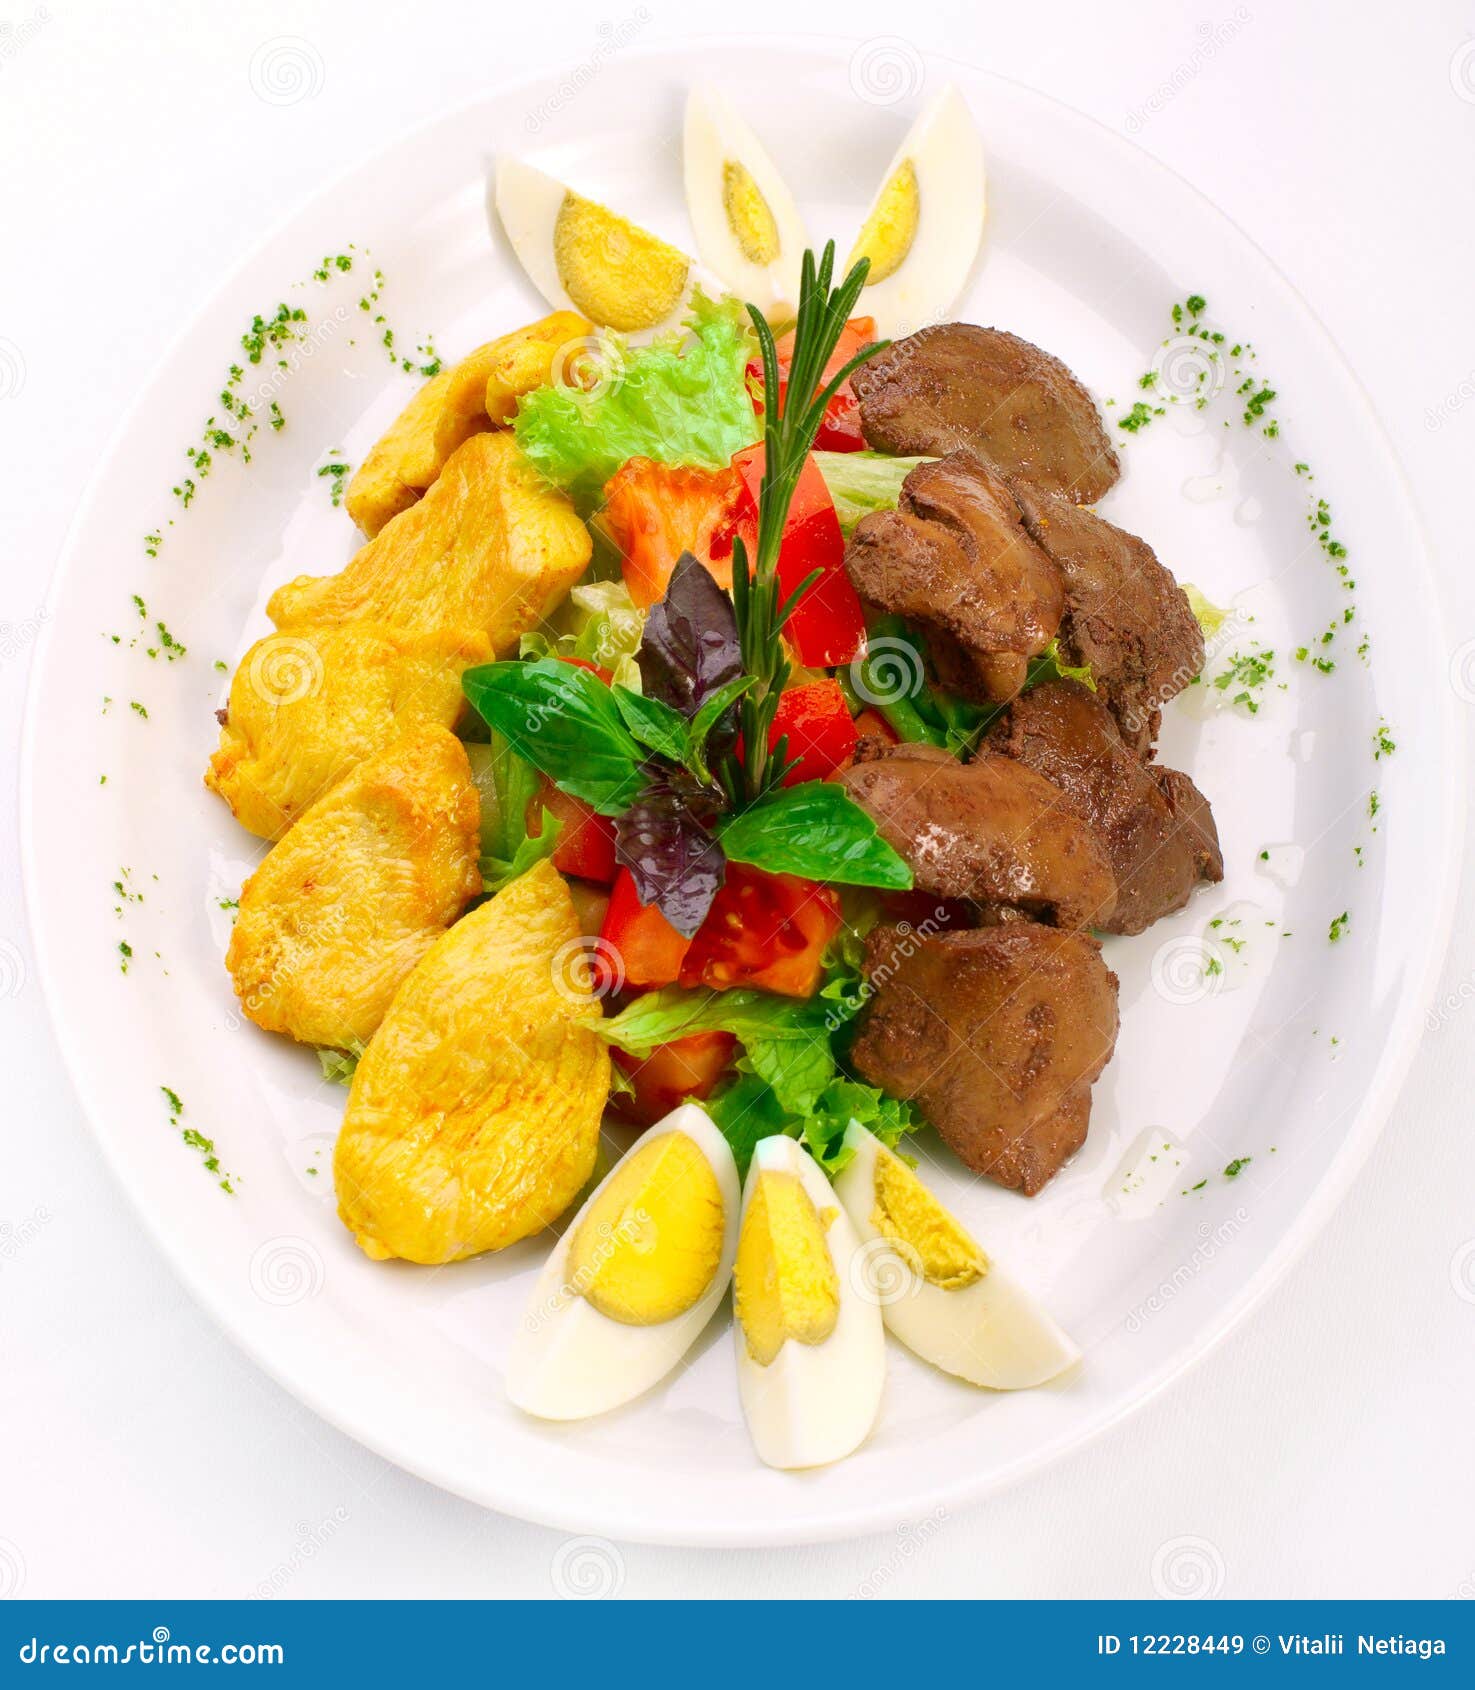 fresh salad with vegetables, chiken and liver